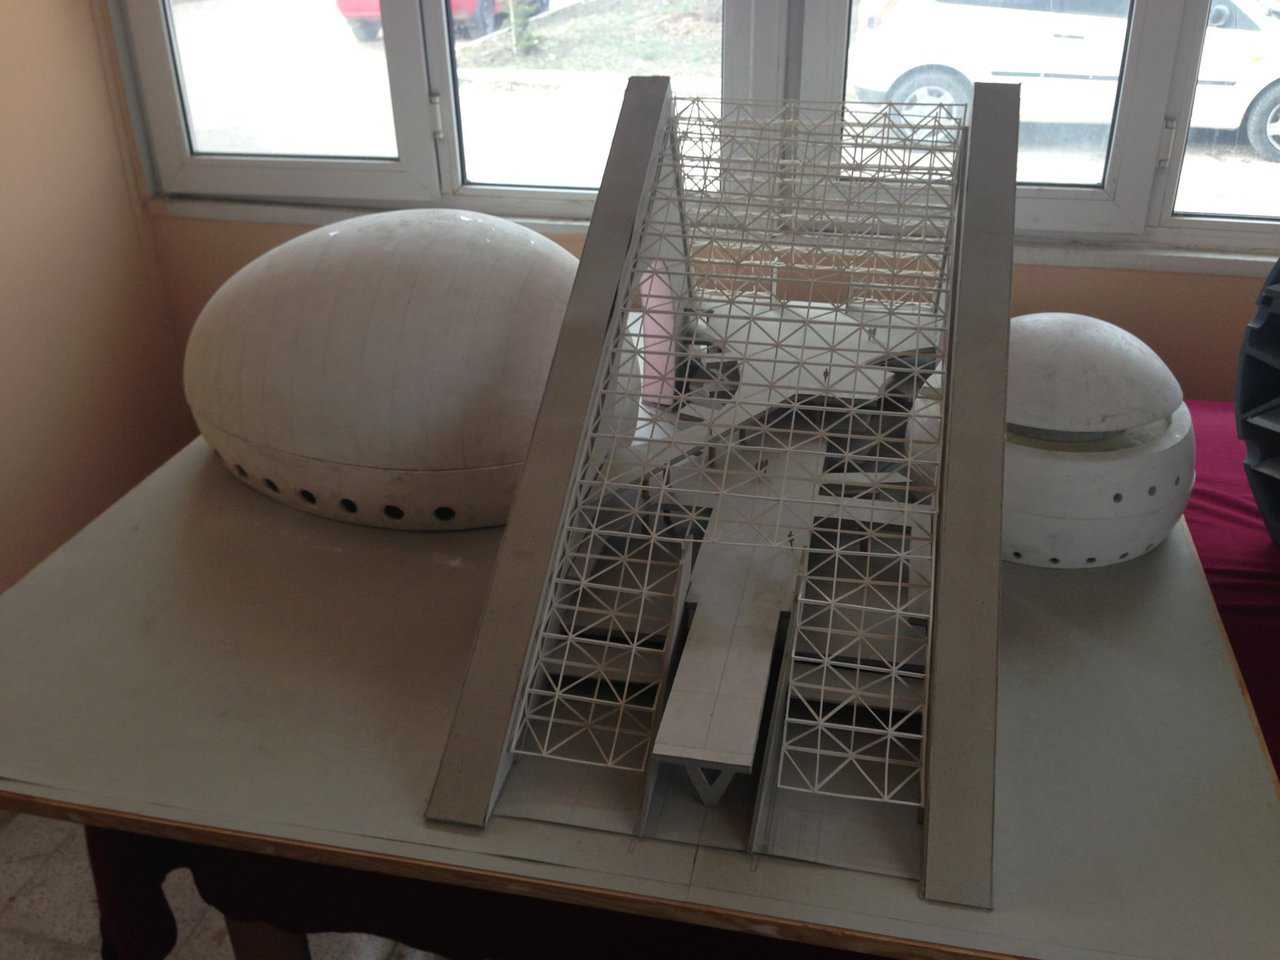 A model of the finished exterior of the colossal ellipsoid dome and its impressive spherical counterpart, juxtaposed with the vaulted triangular foyer, under construction in downtown Ankara, Turkey on Ataturk Boulevard.